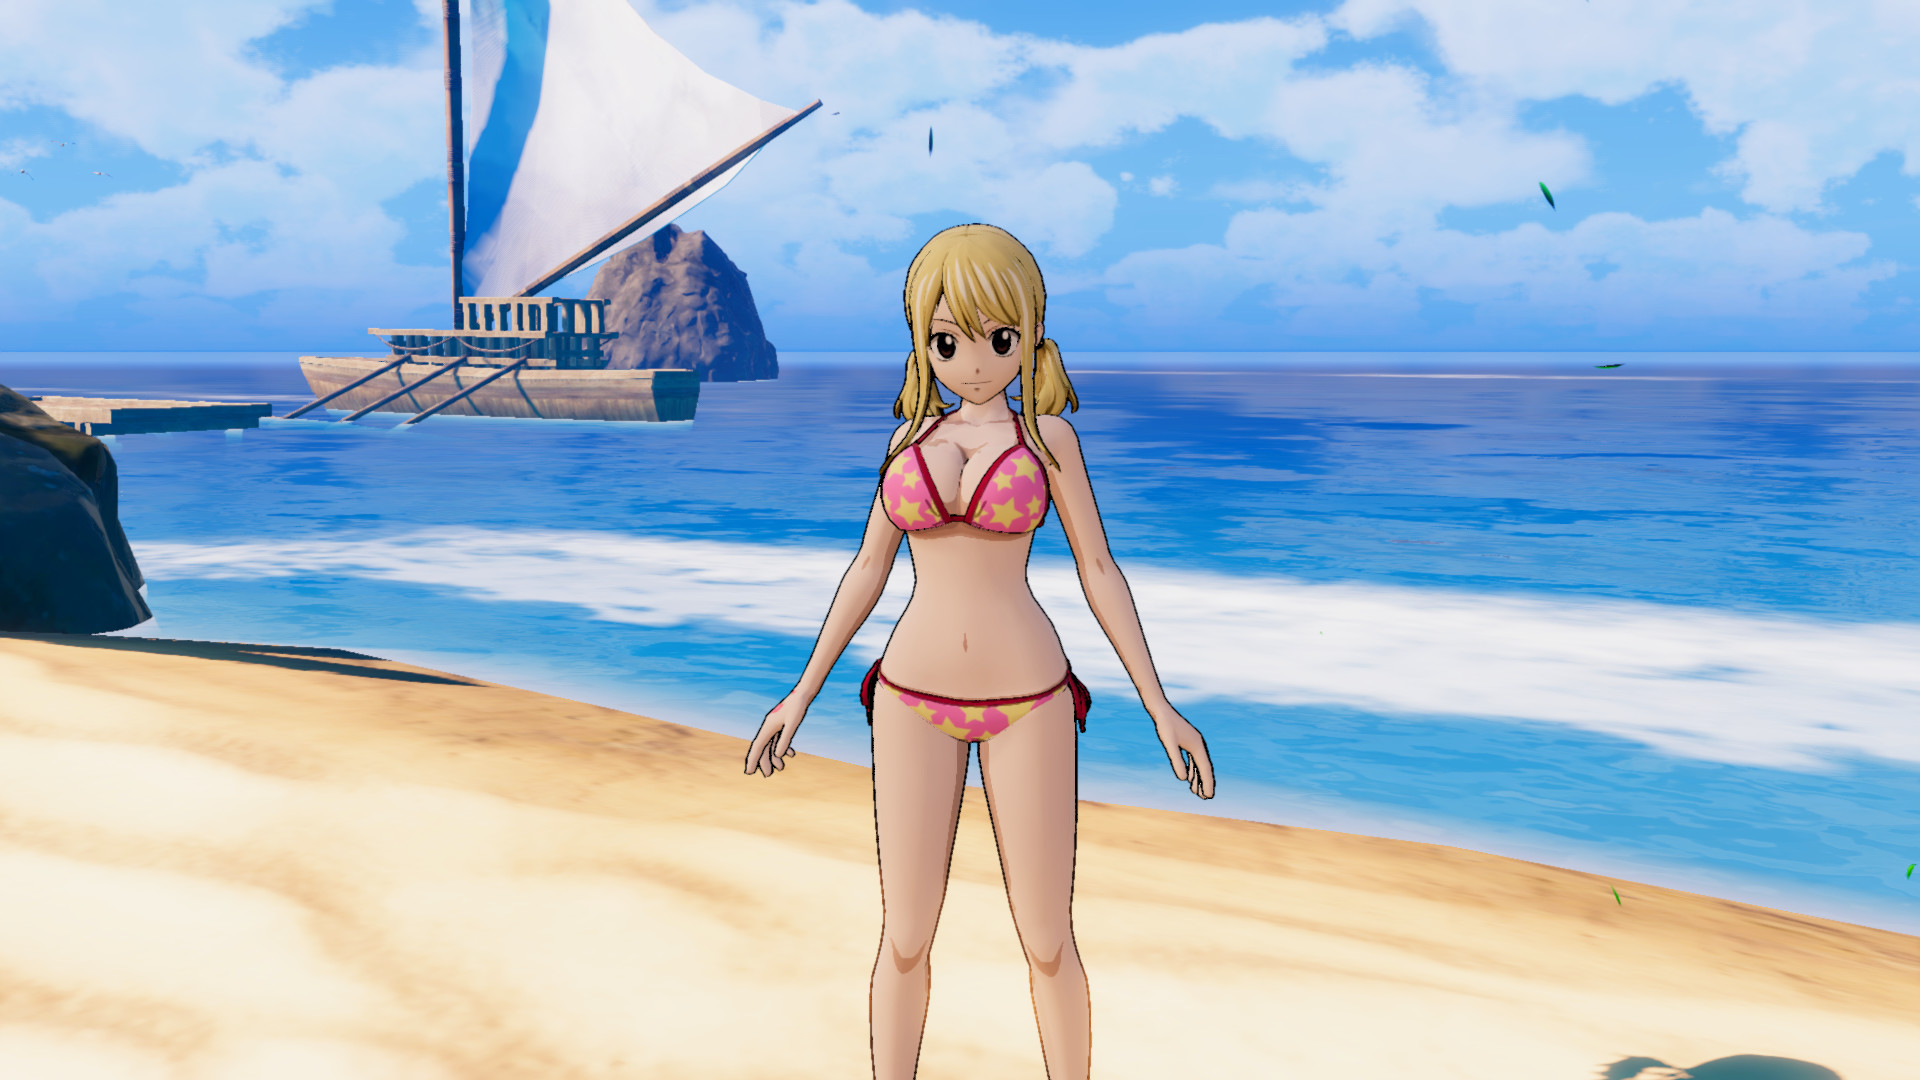 FAIRY TAIL: Lucy's Costume "Special Swimsuit" on Steam